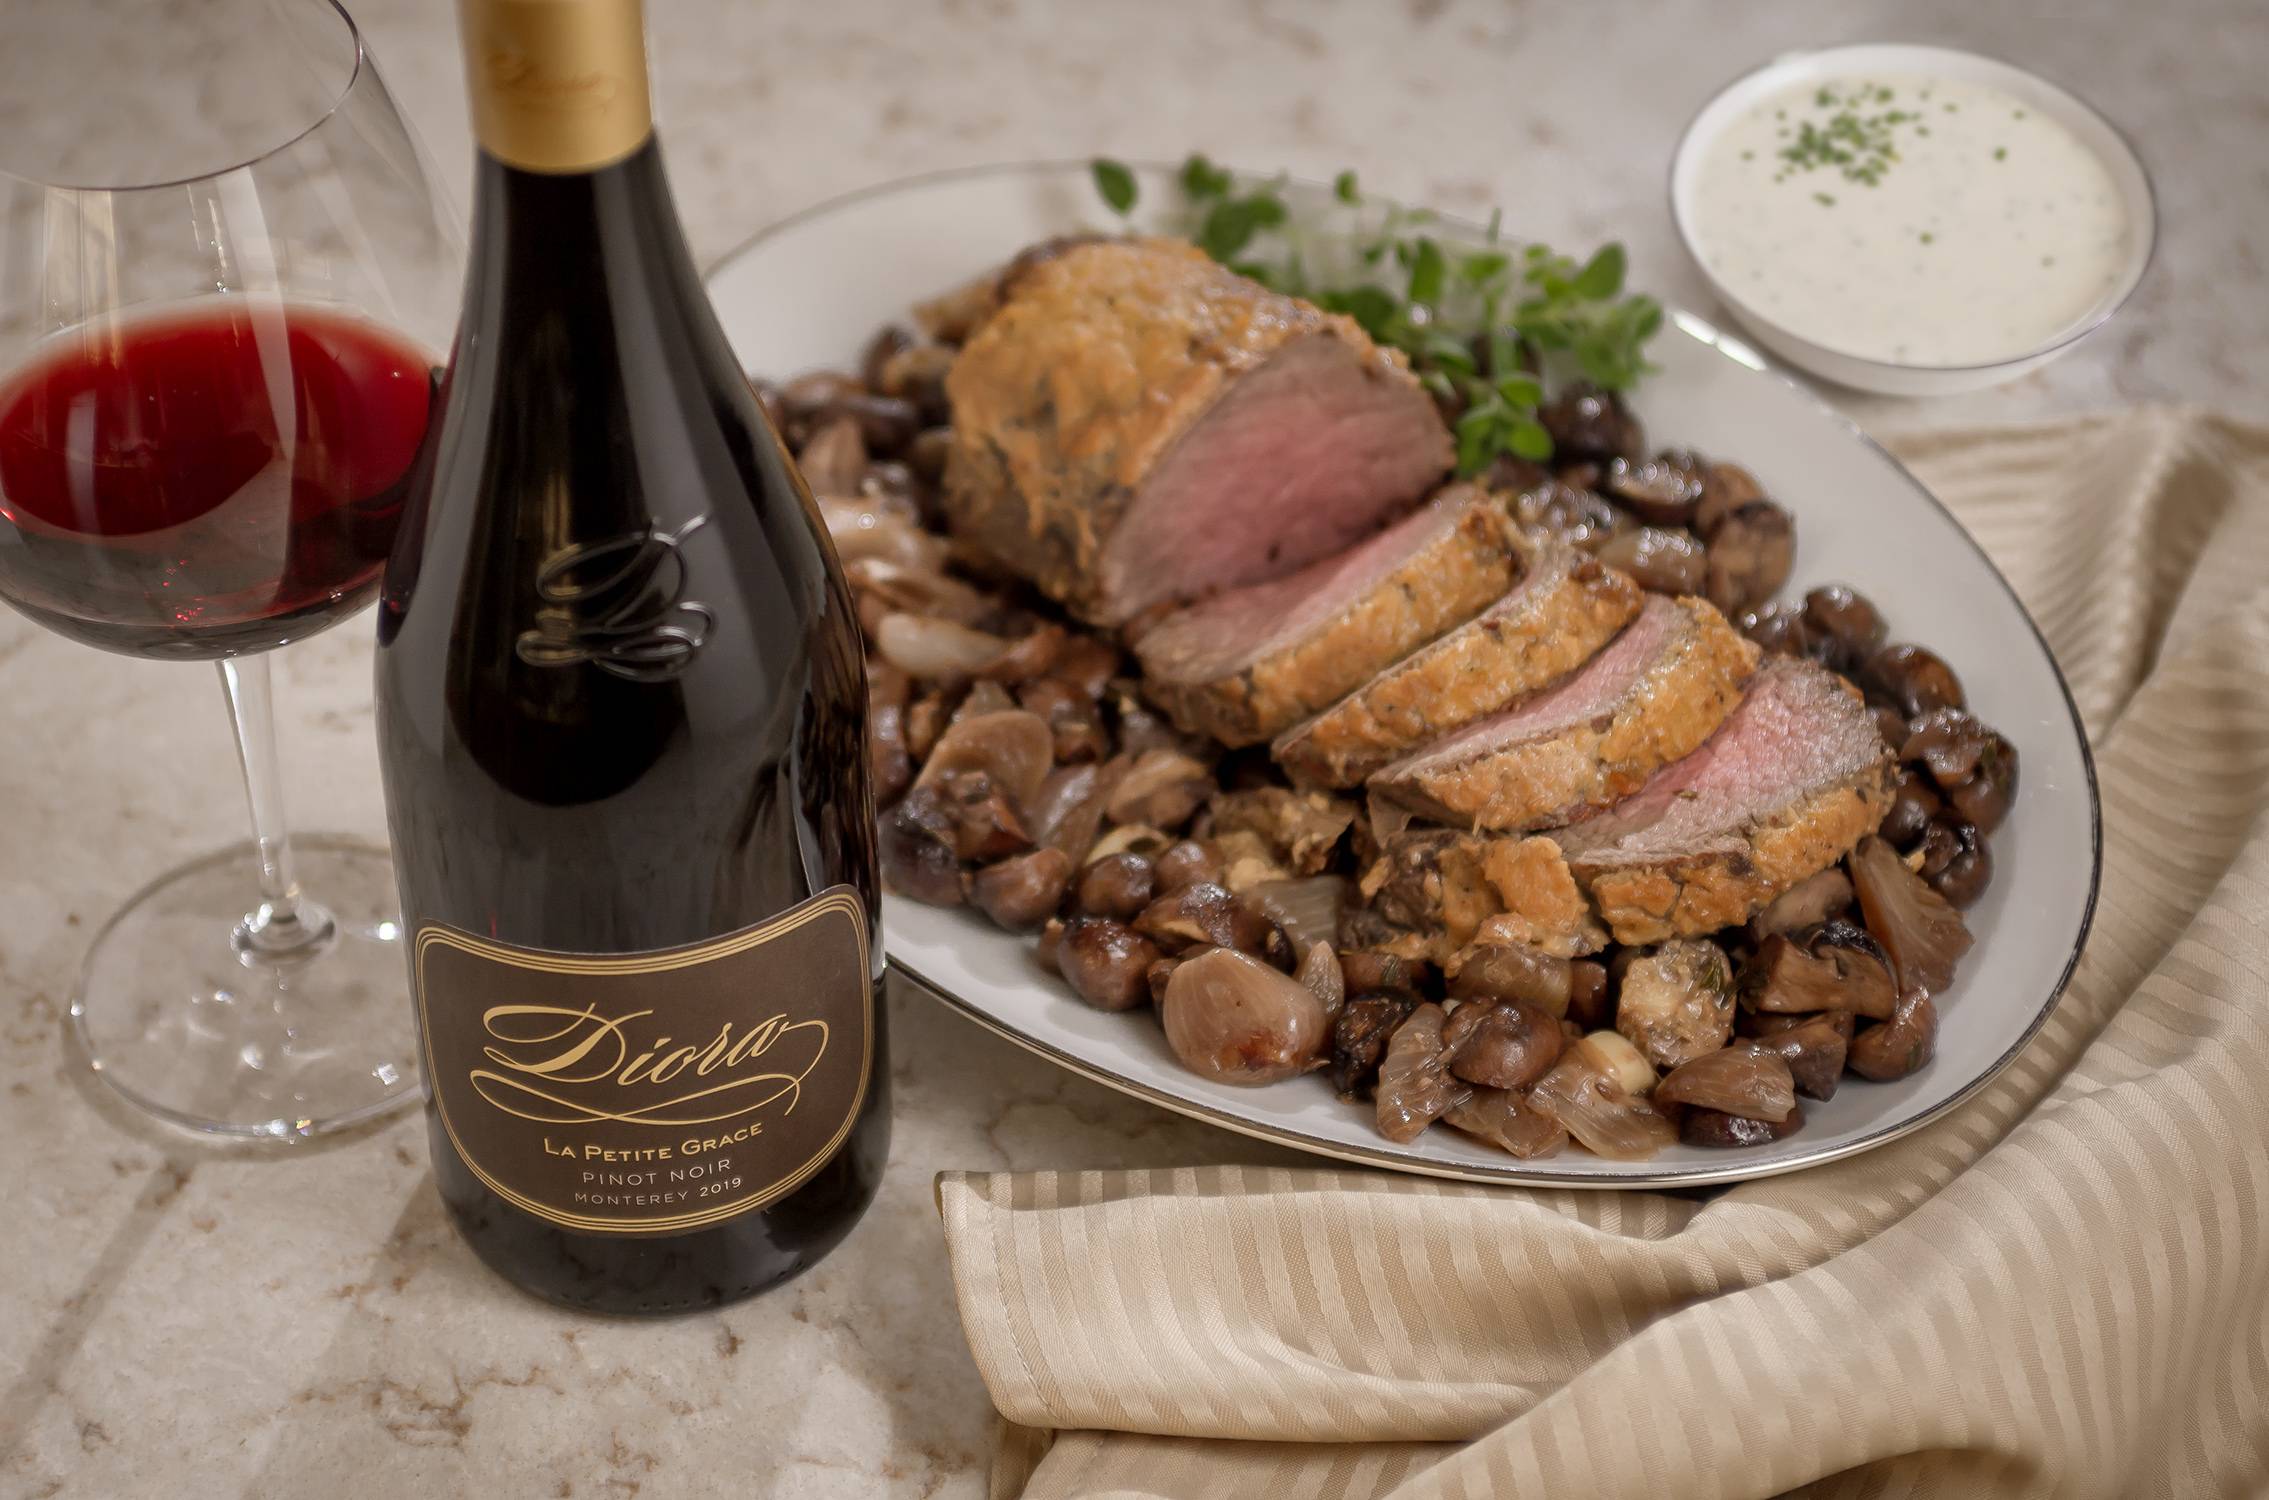 gail simmons' Diora Wine paired with an autumnal meal